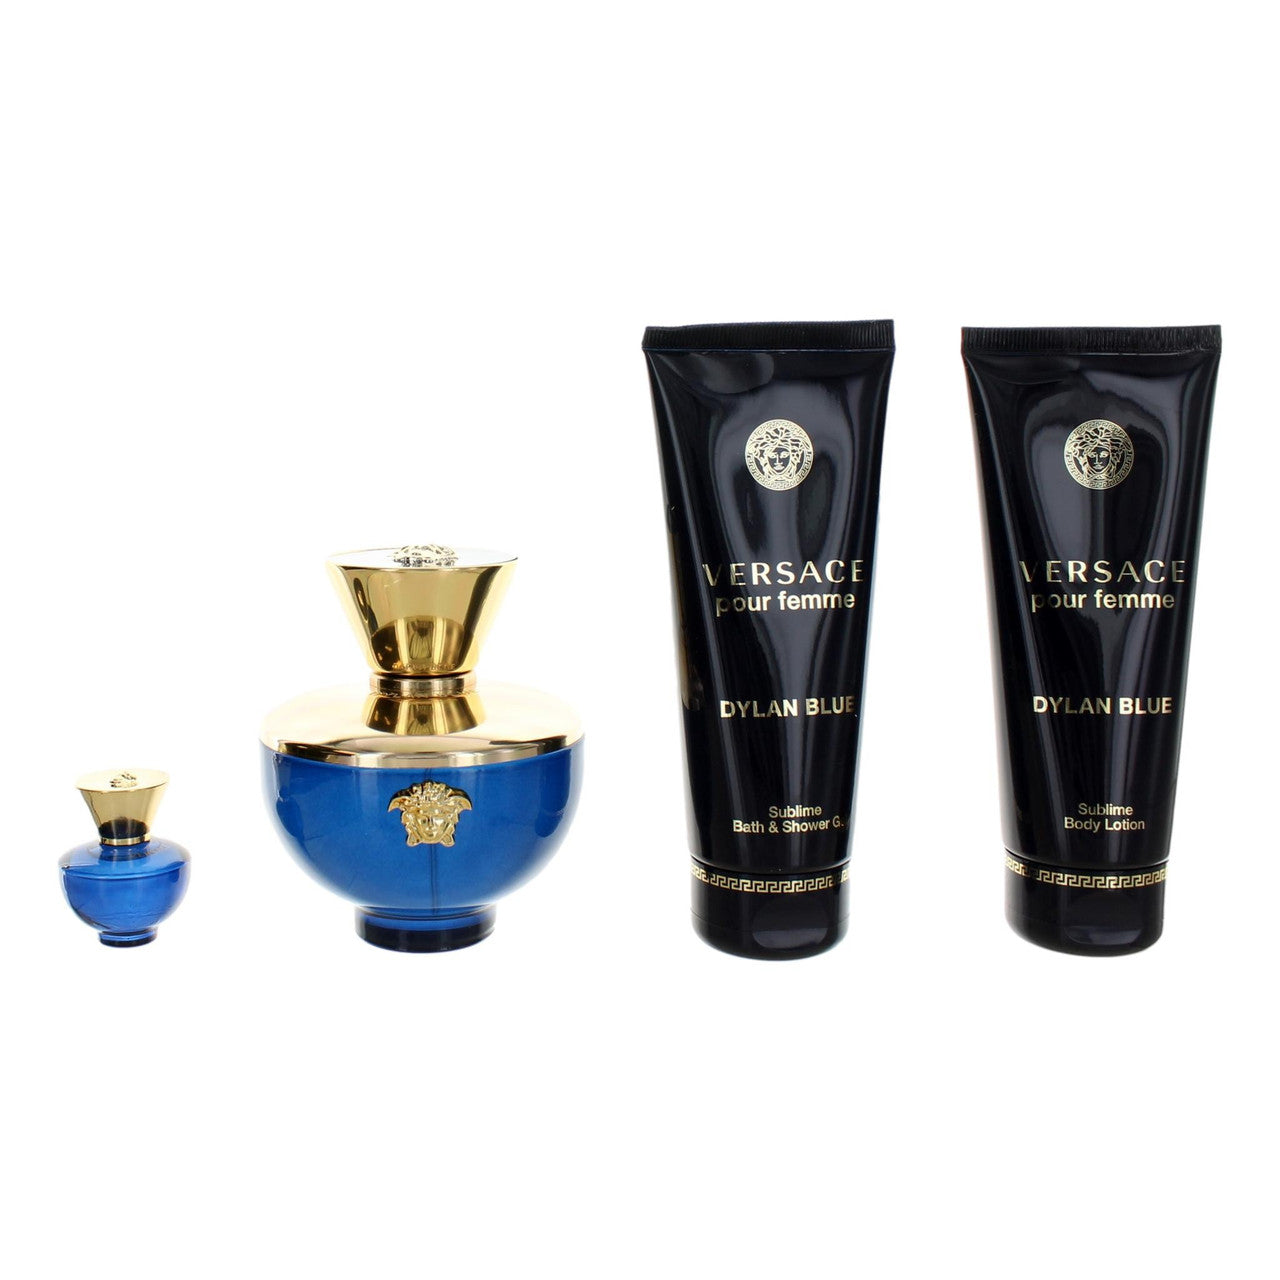 Versace Pour Femme Dylan Blue by Versace, 4 Piece Gift Set